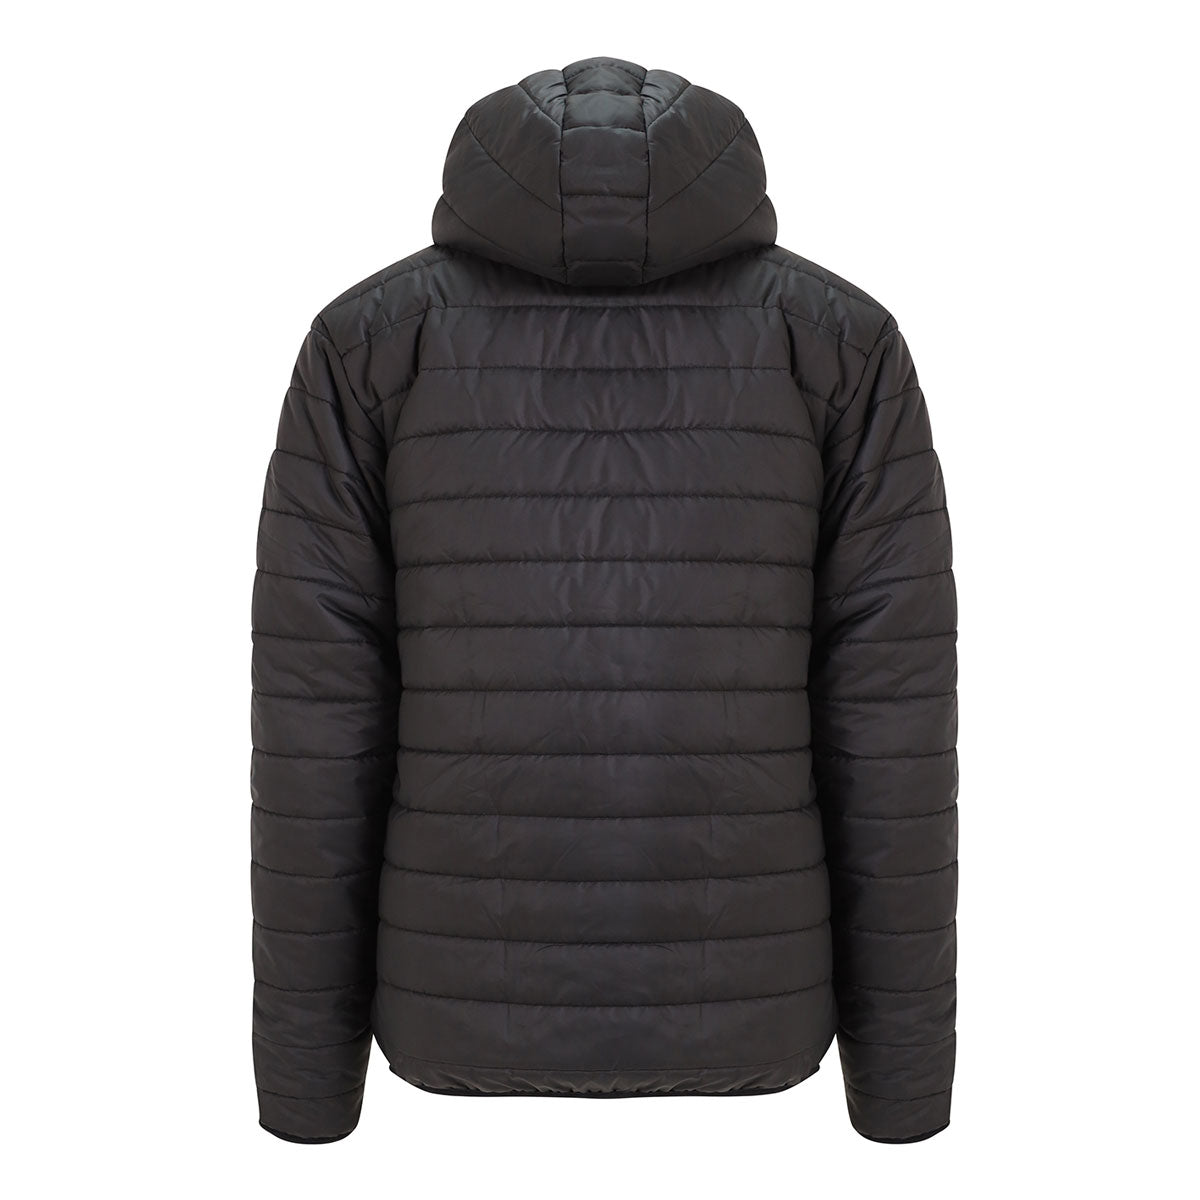 Mc Keever Wolfe Tones Na Sionna, Clare Core 22 Puffa Jacket - Adult - Black